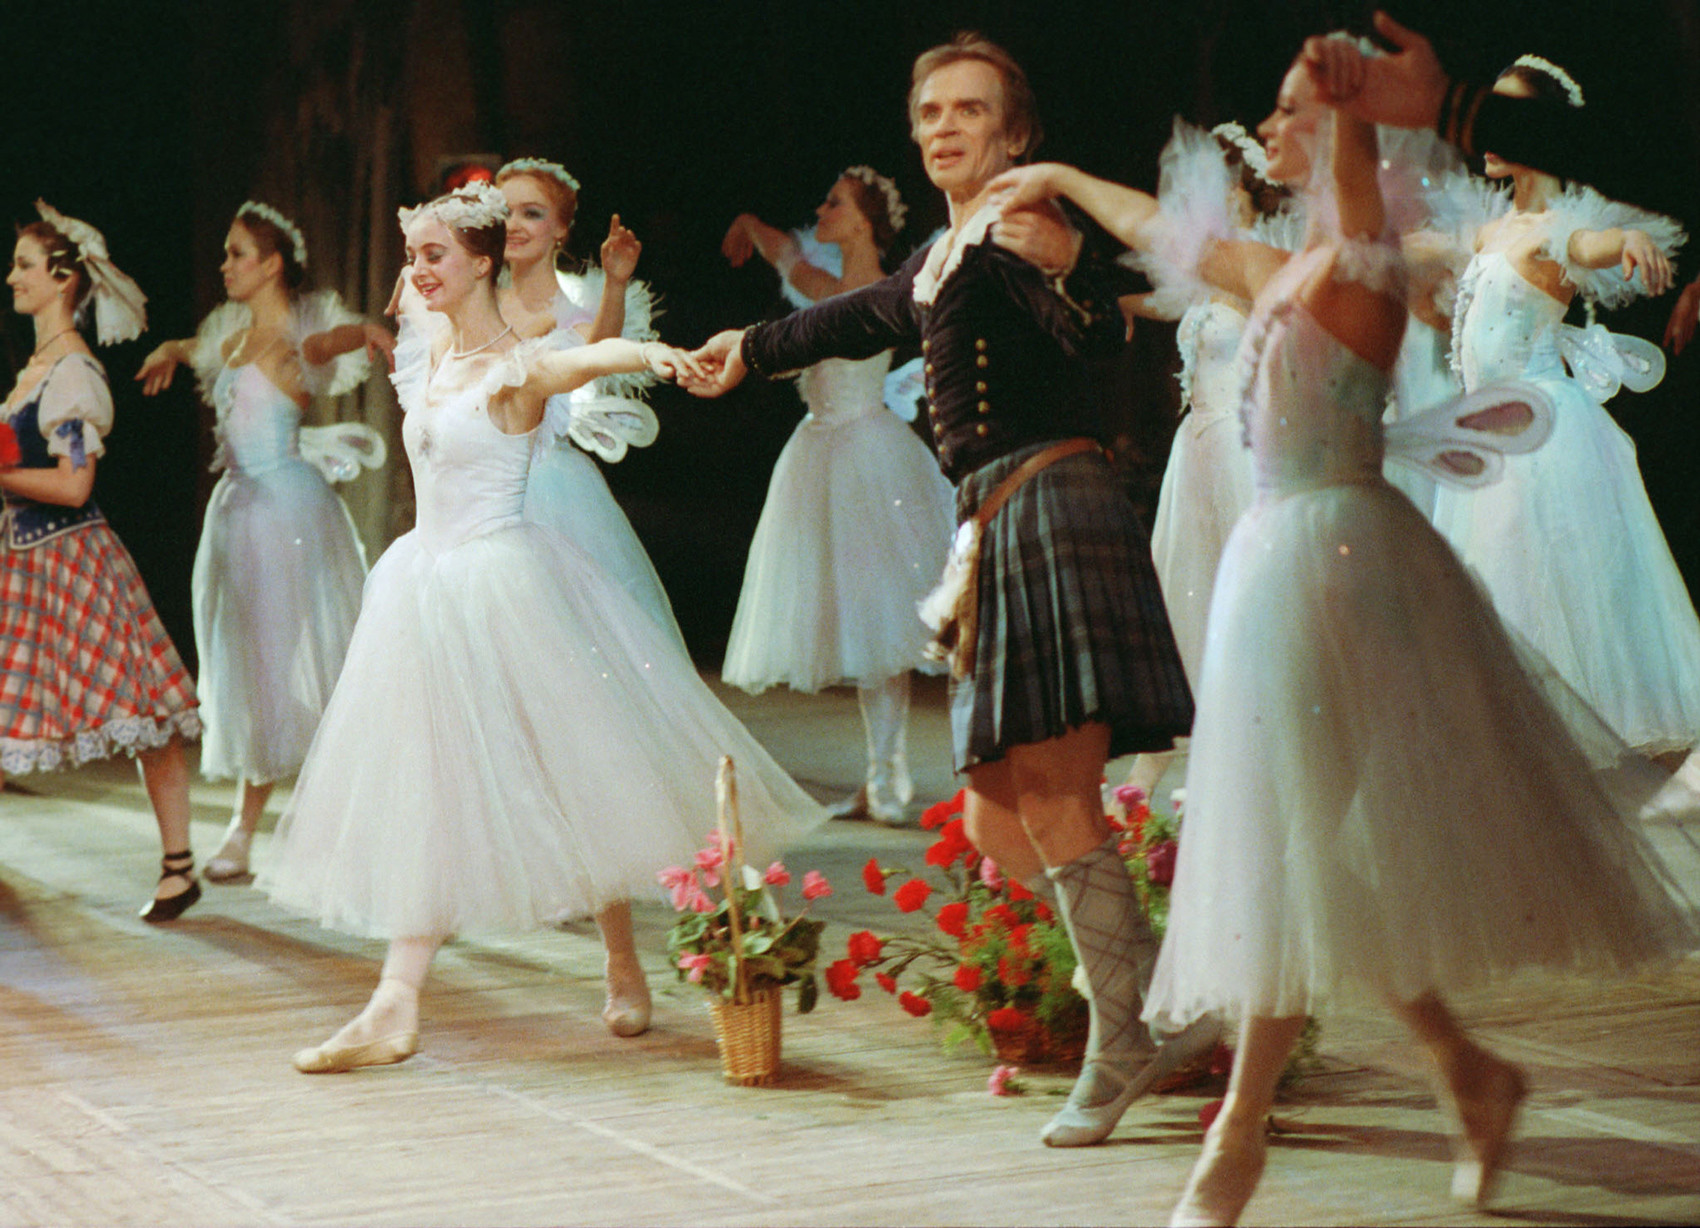 In 1989, 30 years after he left his motherland Rudolf Nuriyev visited Leningrad to dance at the Kirov Opera and Ballet Theatre